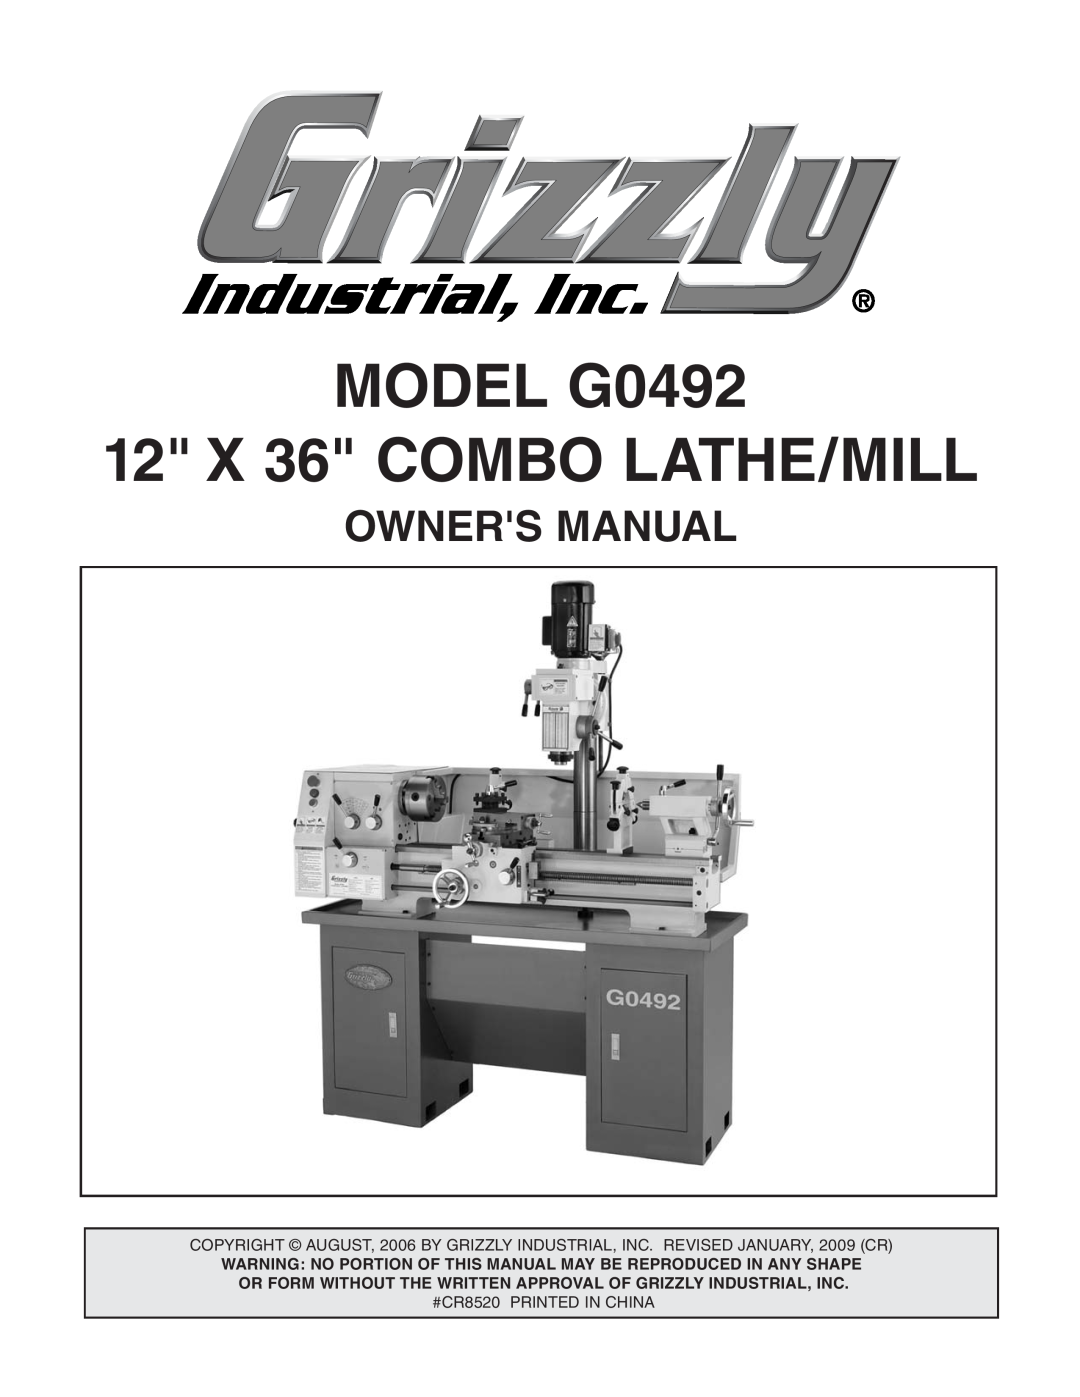 Grizzly owner manual Owners Manual, MODEL G0492 12 X 36 COMBO LATHE/MILL 